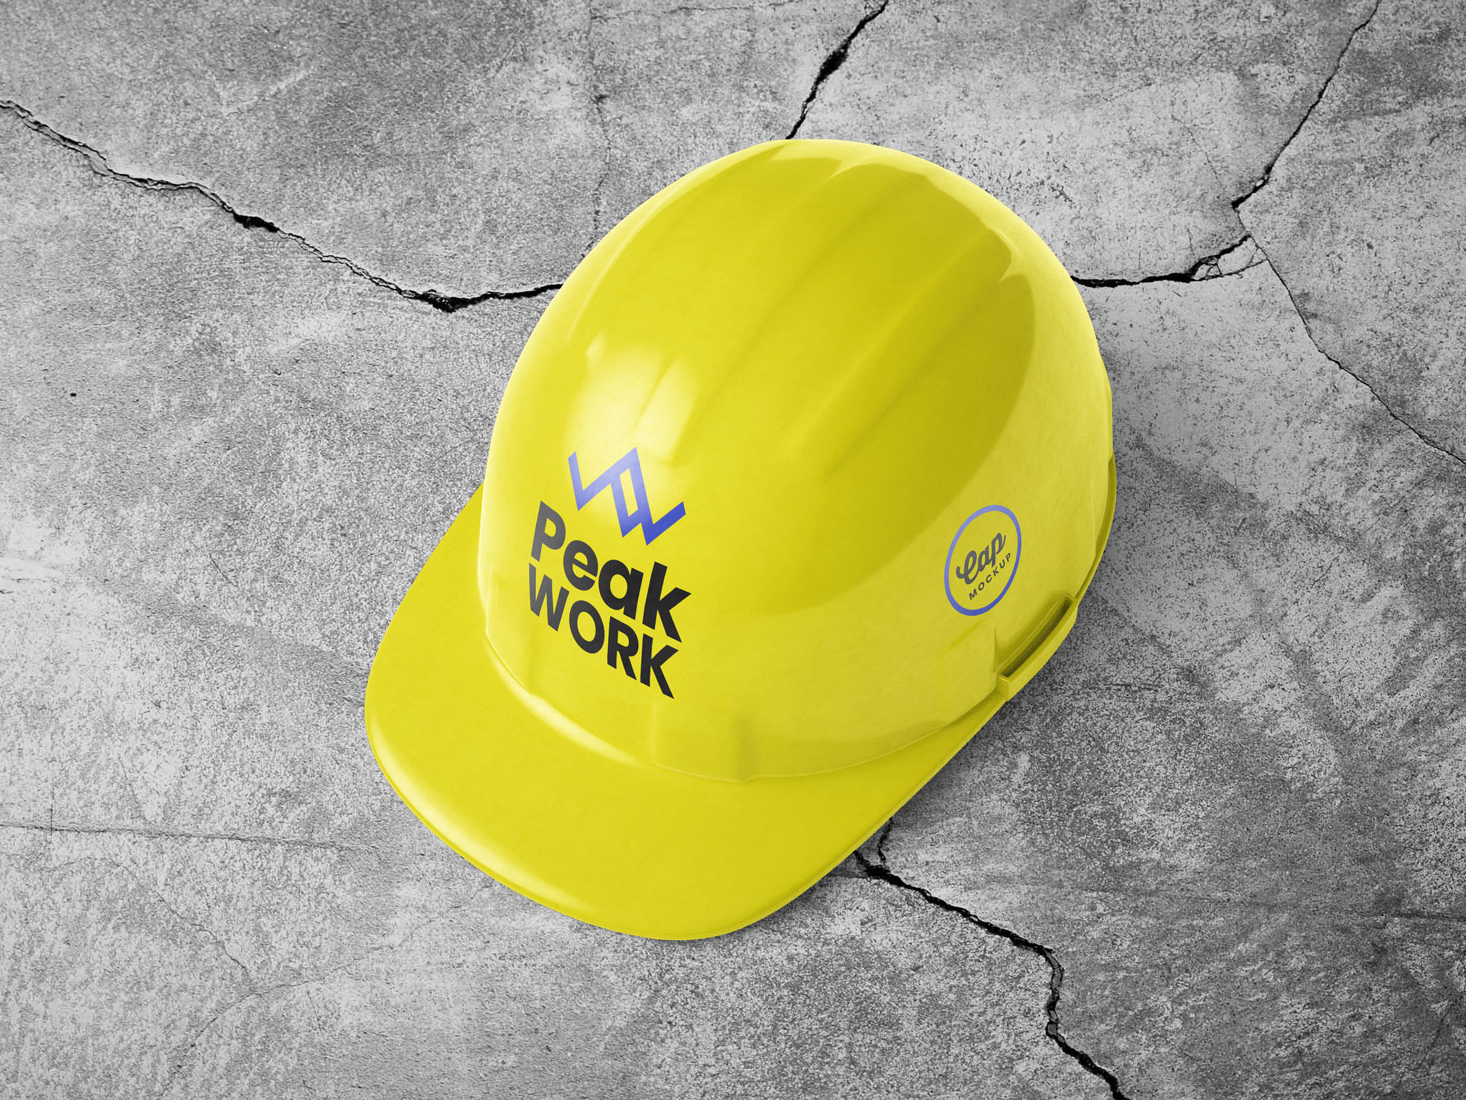 Download Free Construction Safety Helmet / Cap Mockup PSD by Zee Que | Designbolts on Dribbble